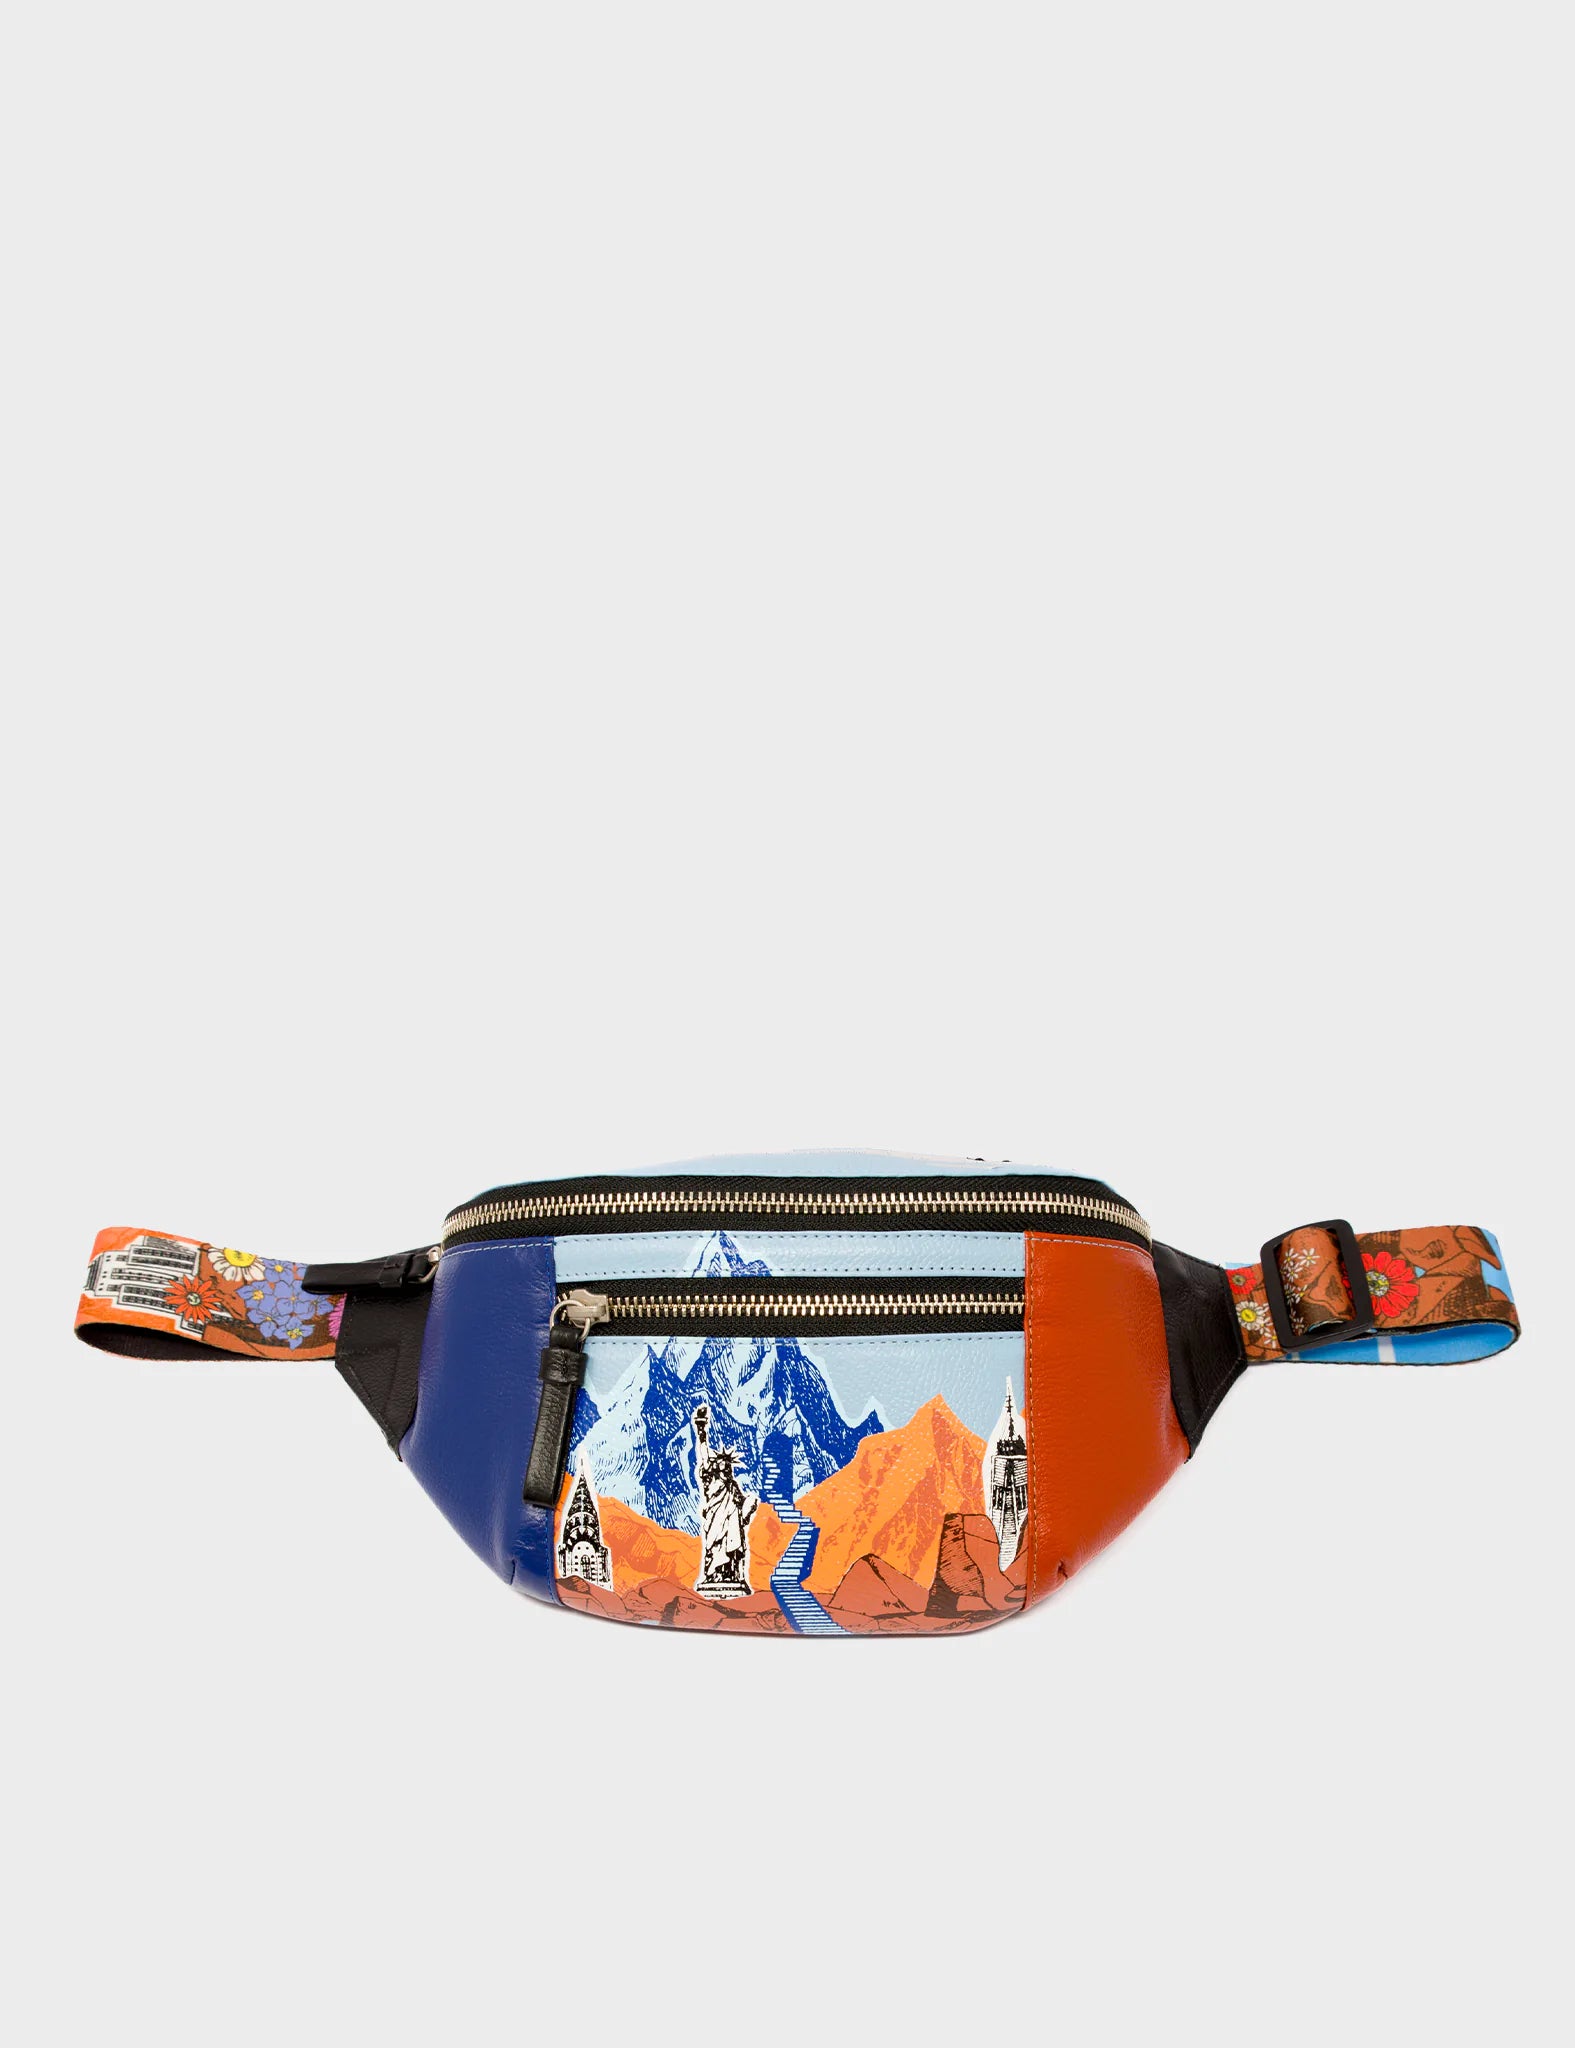 Bag Fanny Pack Royal Blue Leather - NYC Skyline Print - Front